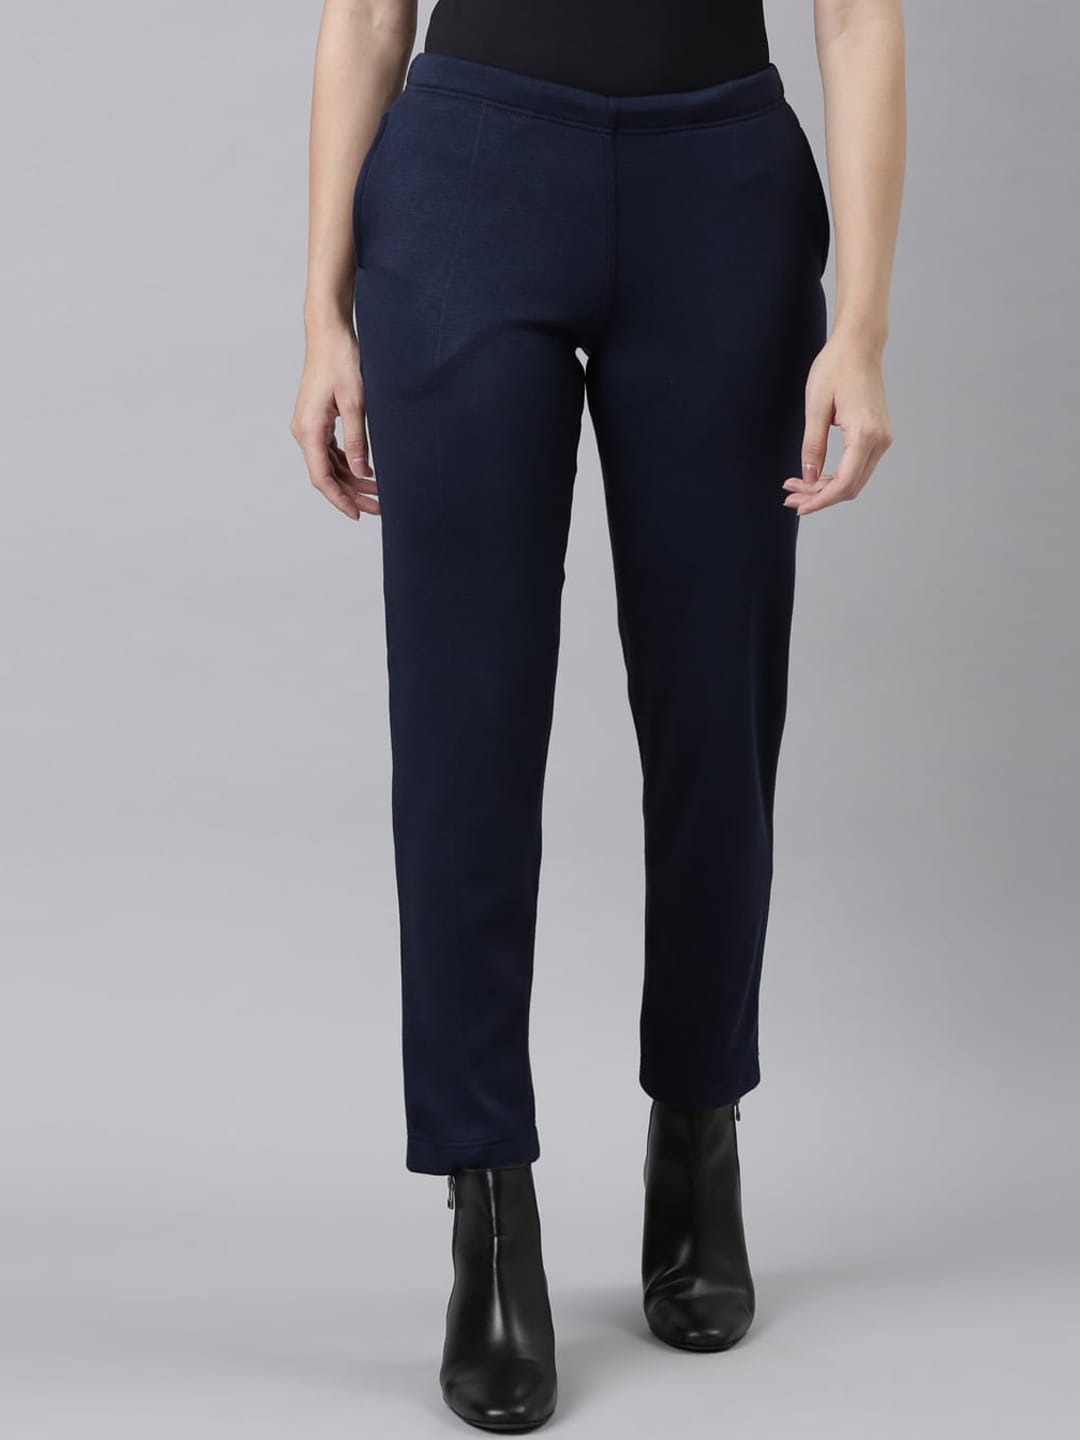 Go Colors Women Tailored Tapered Fit Acrylic Trousers Price in India